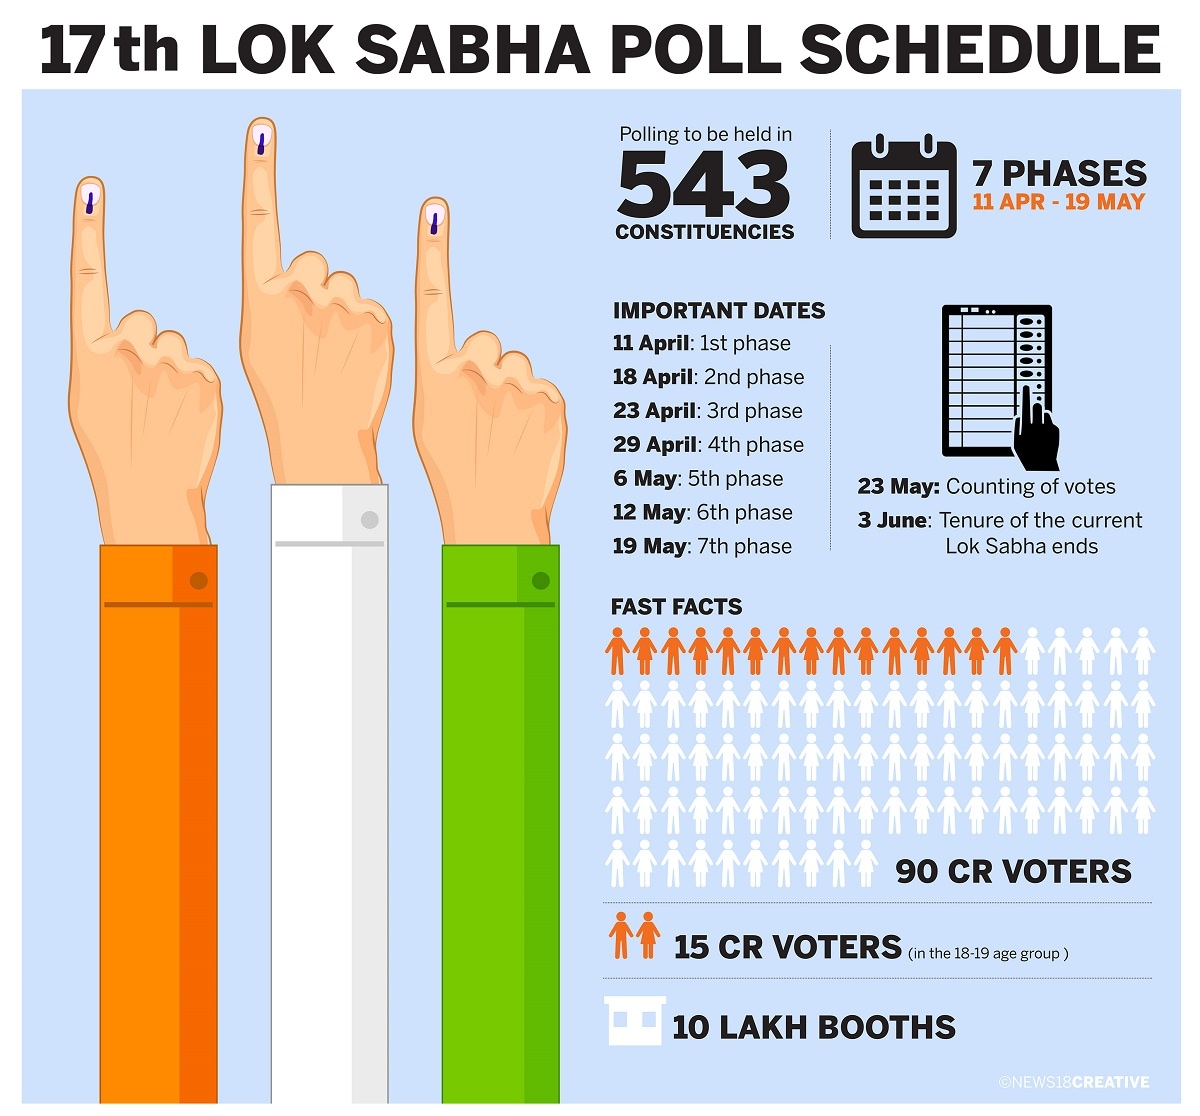 Lok Sabha polls to be held in 7 phases from April 11 to May 19